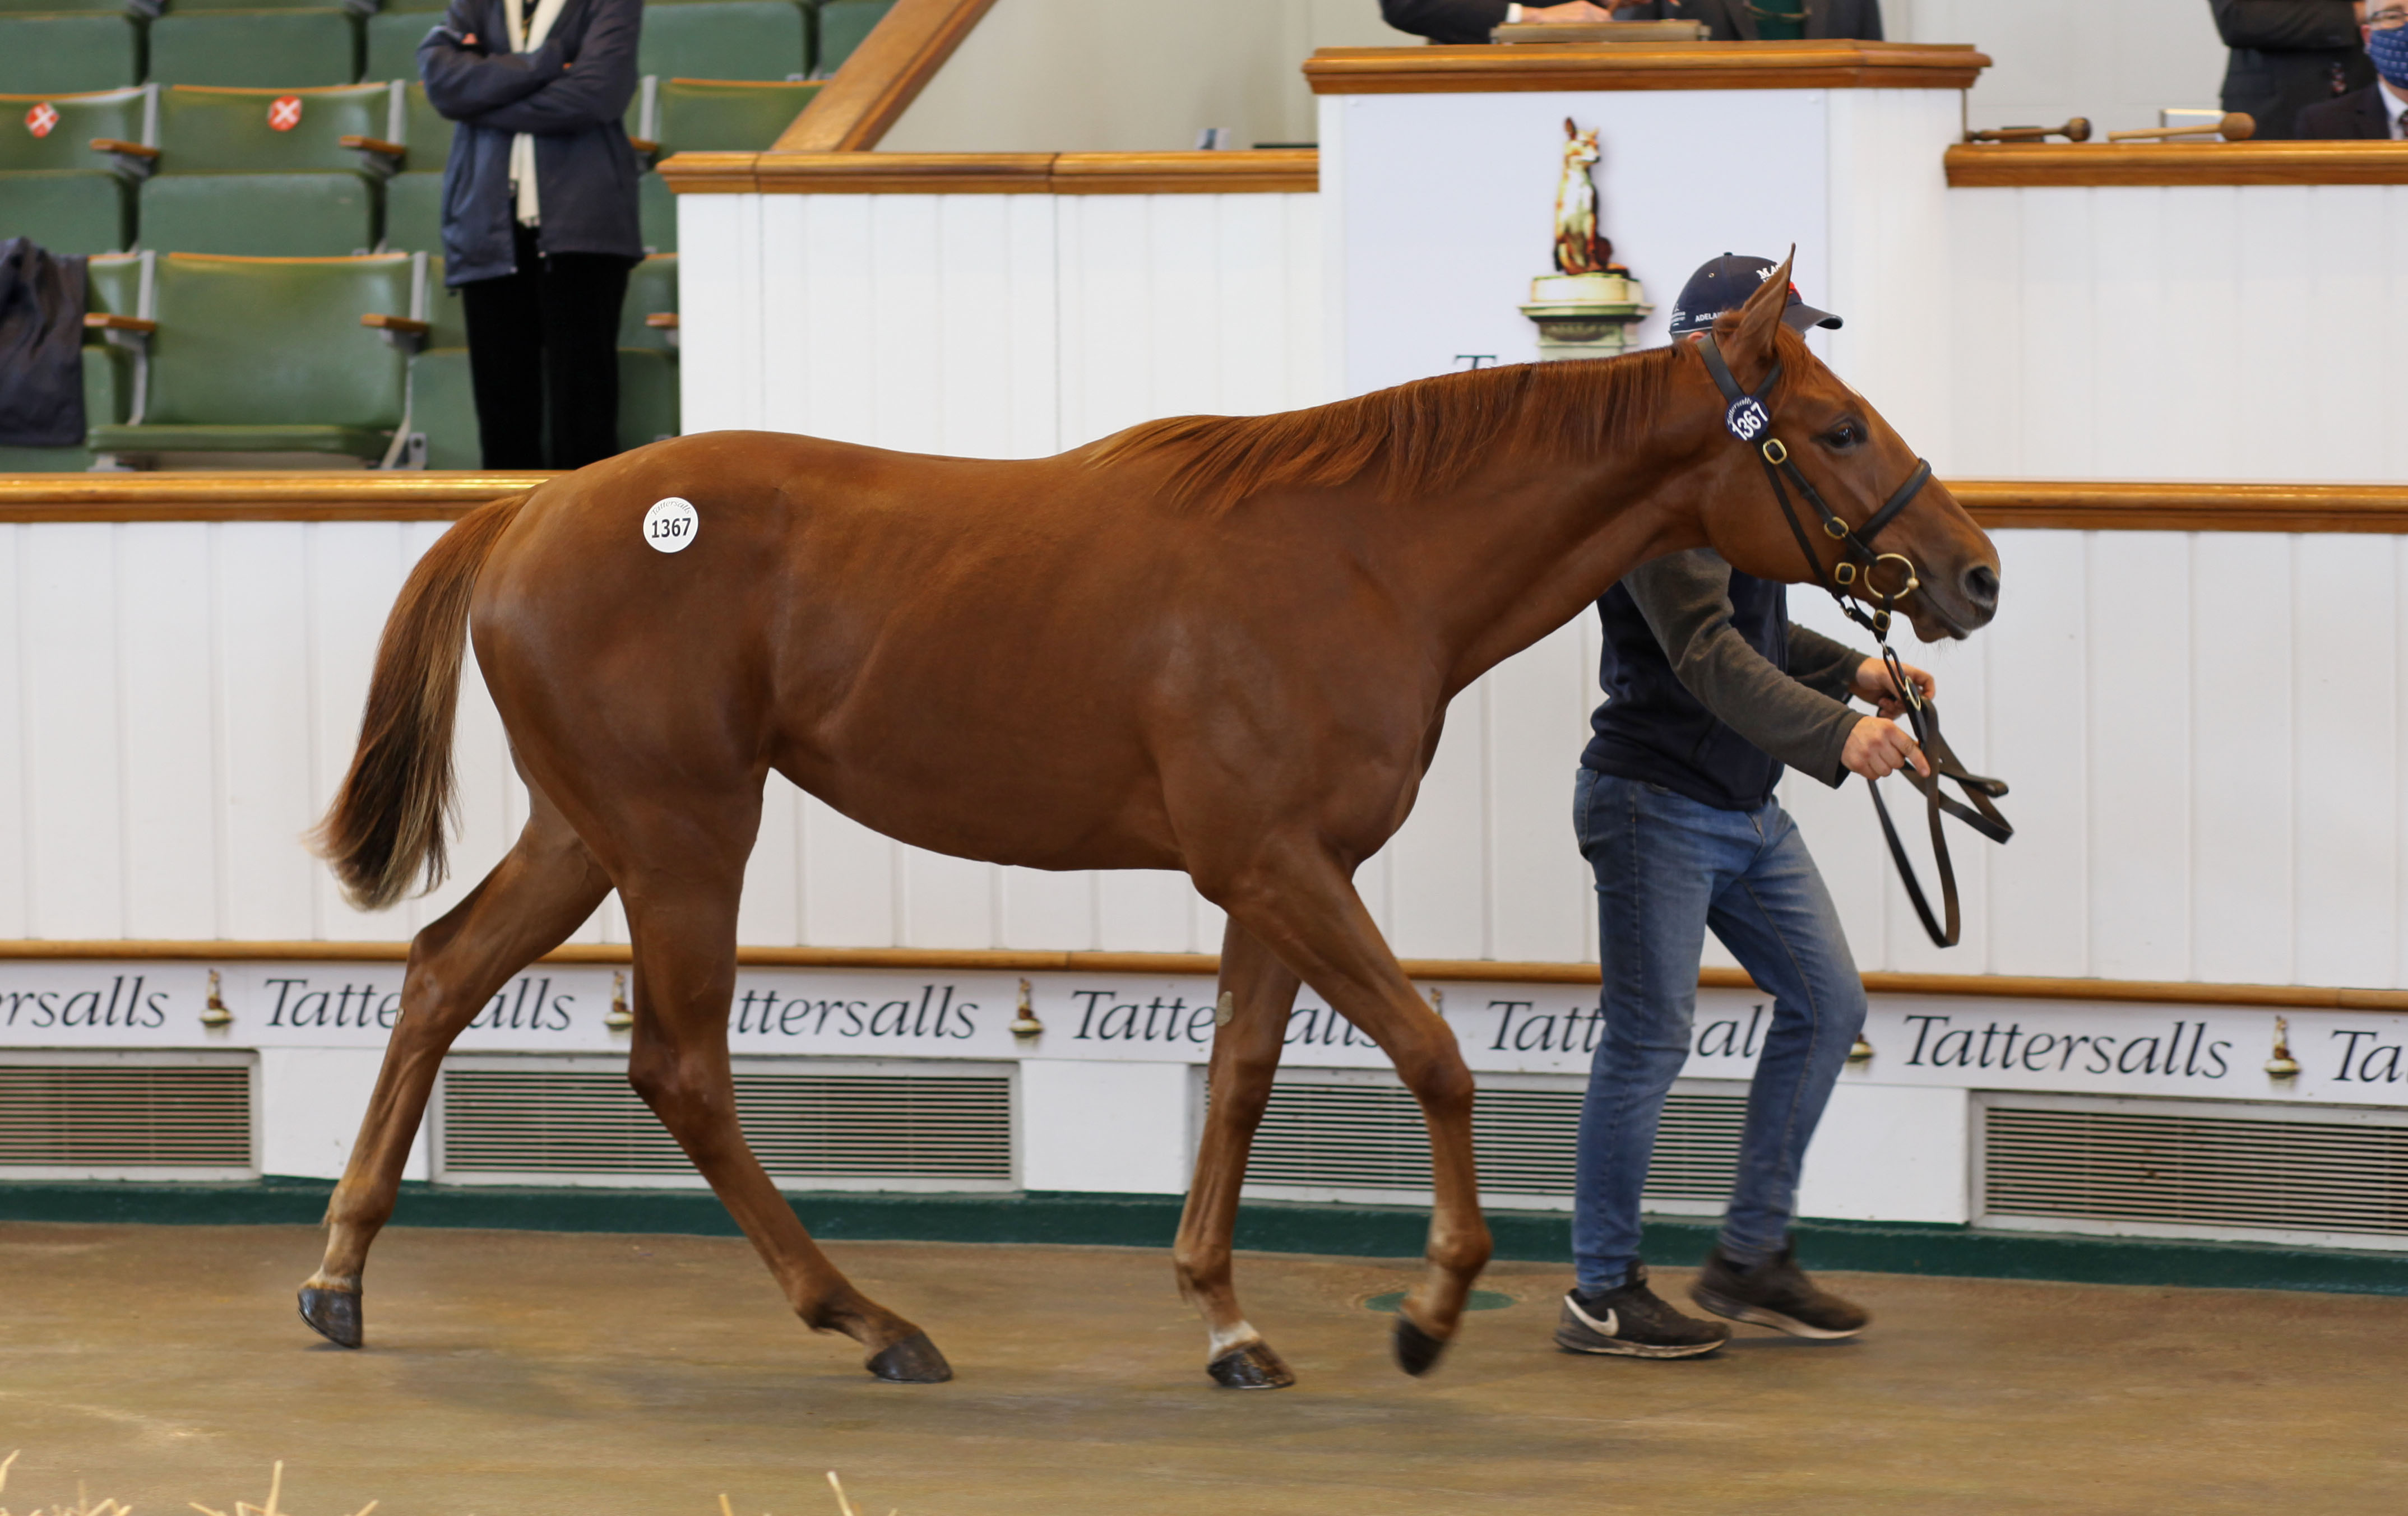 Lot 1367 Night Of Thunder - Dominike colt. Picture: Tattersalls.